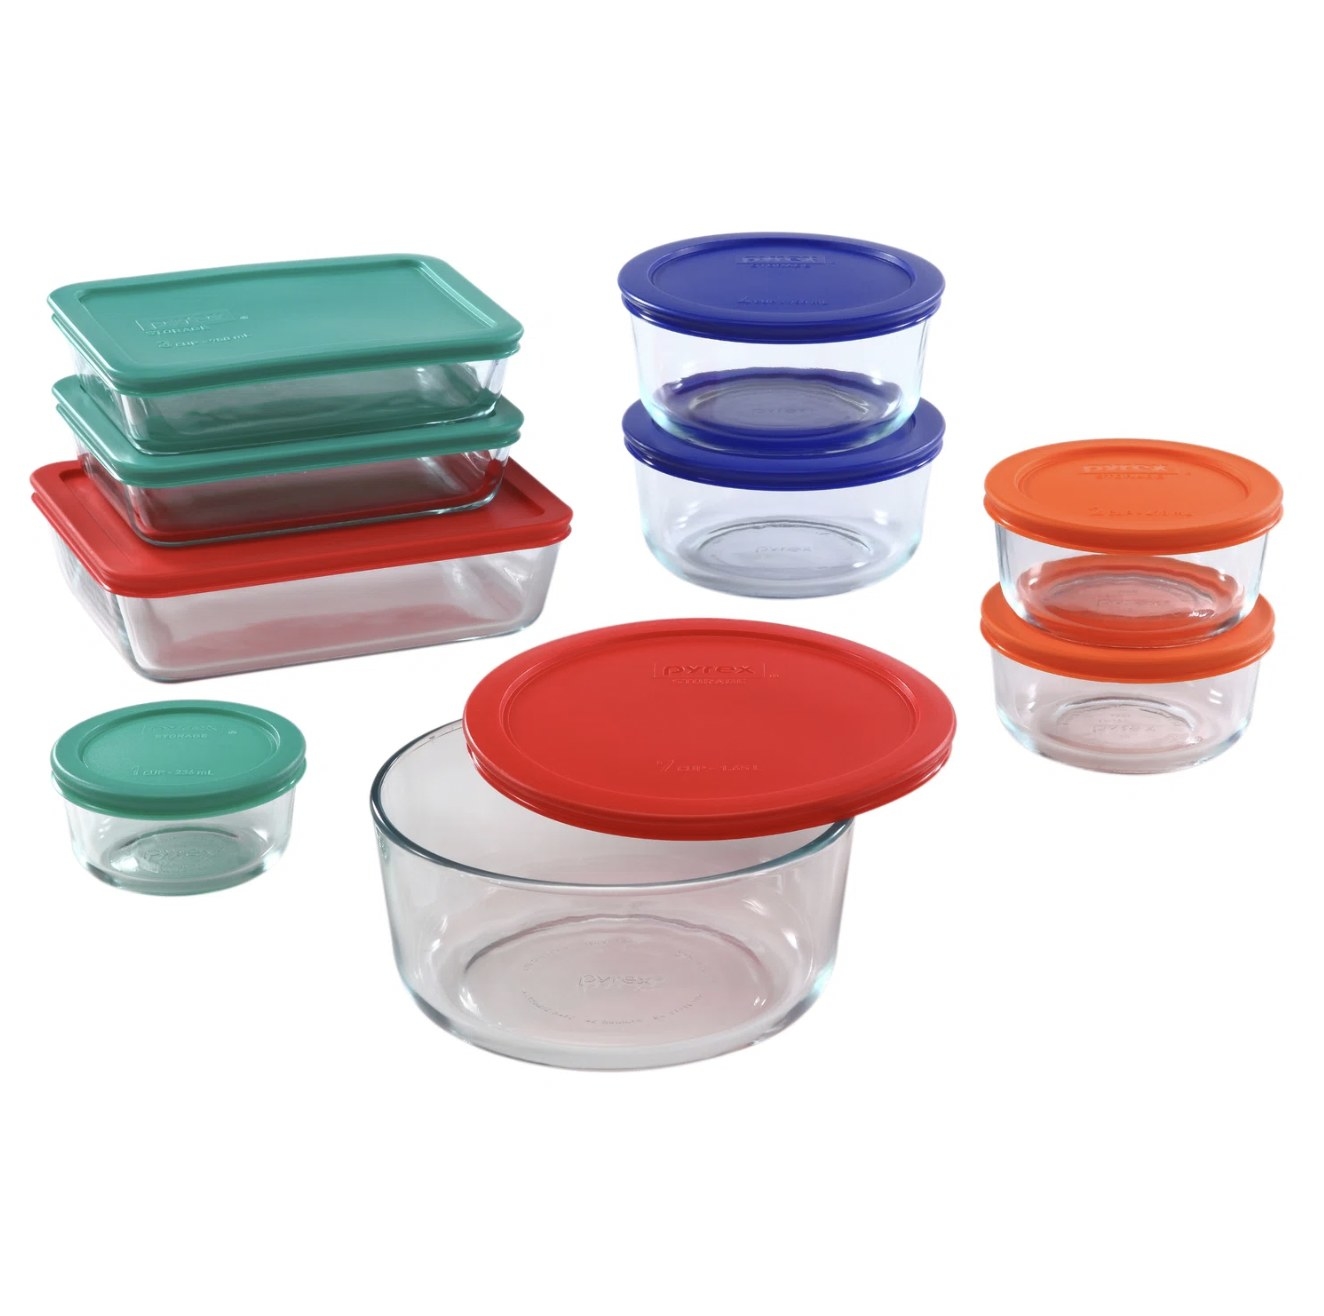 the nine glass food storage containers in different colors